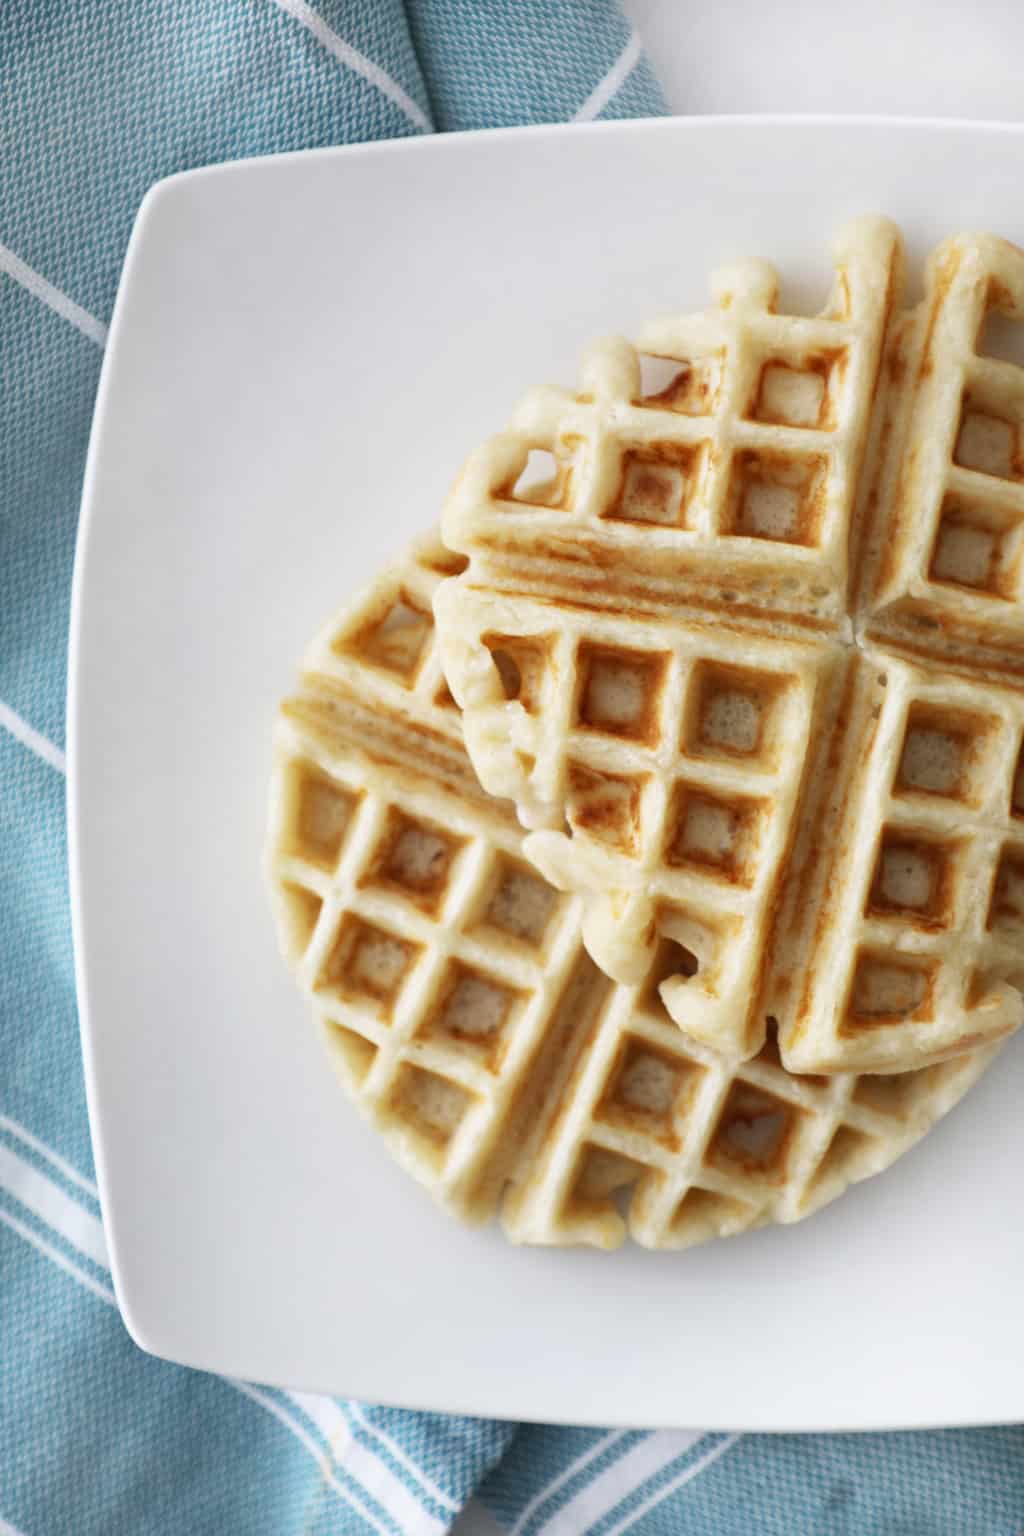 two plain yeast waffles on a white square plate next to a blue tea towel